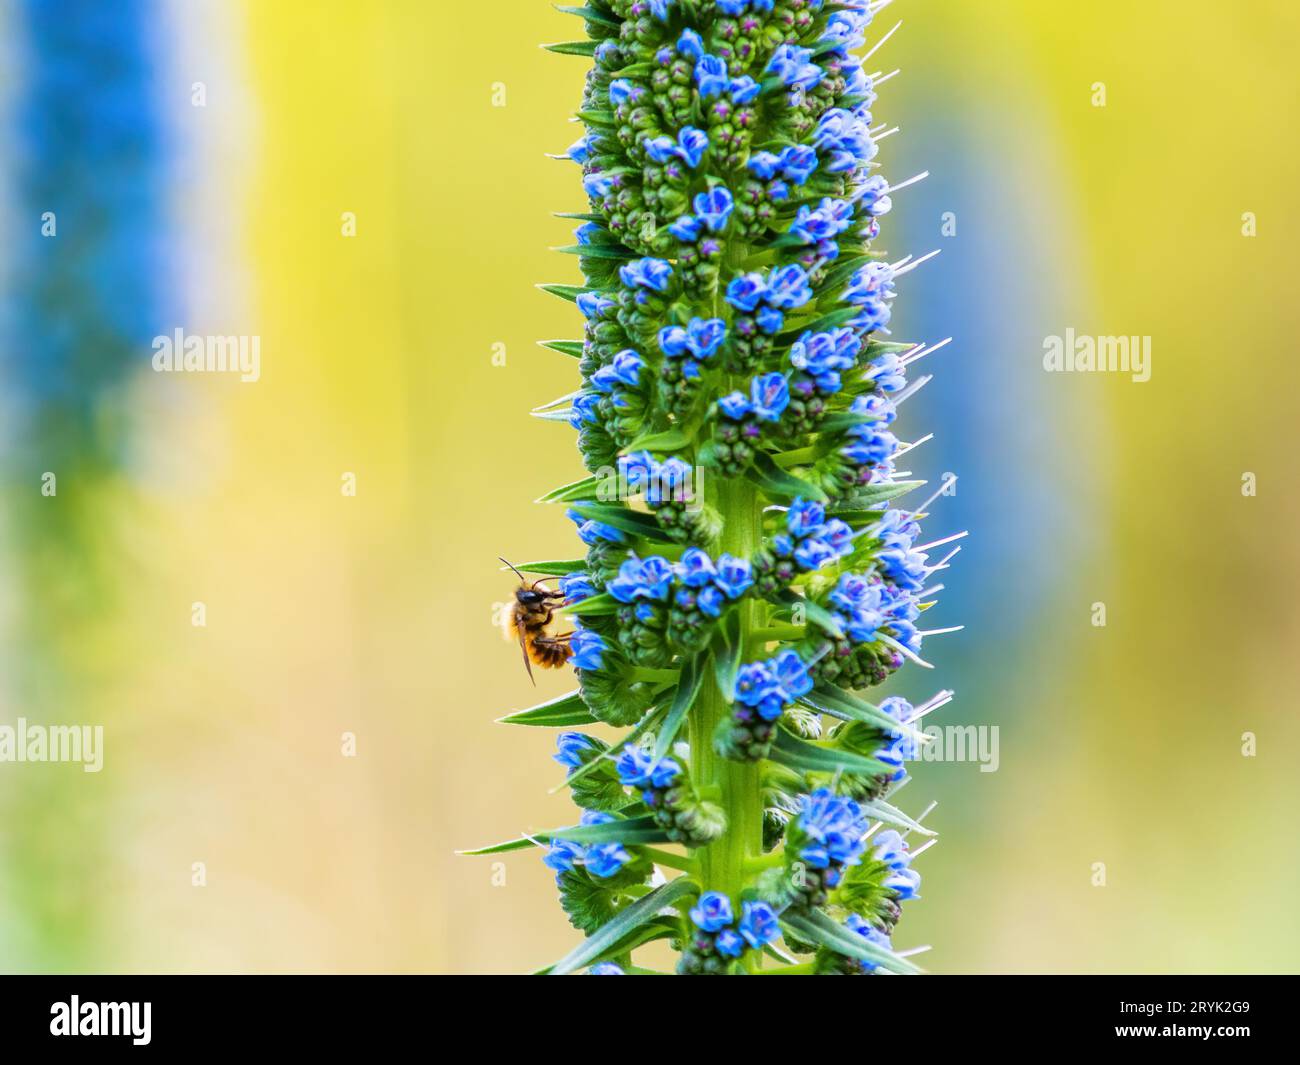 Echium Candicans Pride of Madeira blue flower spike with a blurred natural green vegetation background Stock Photo